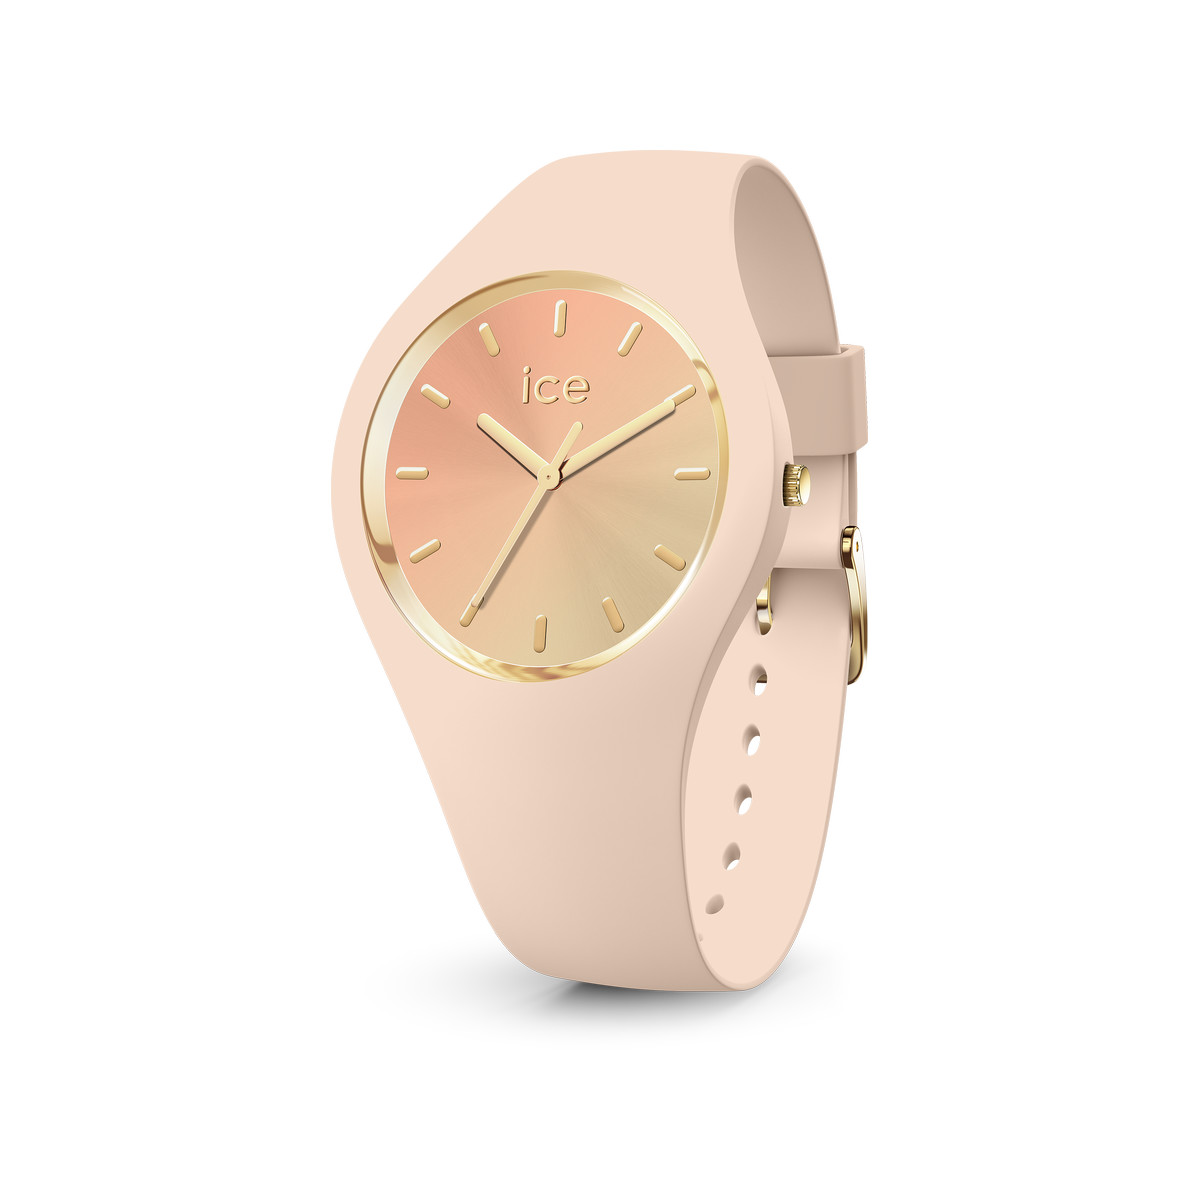 Montre Ice Watch femme  bracelet silicone rose